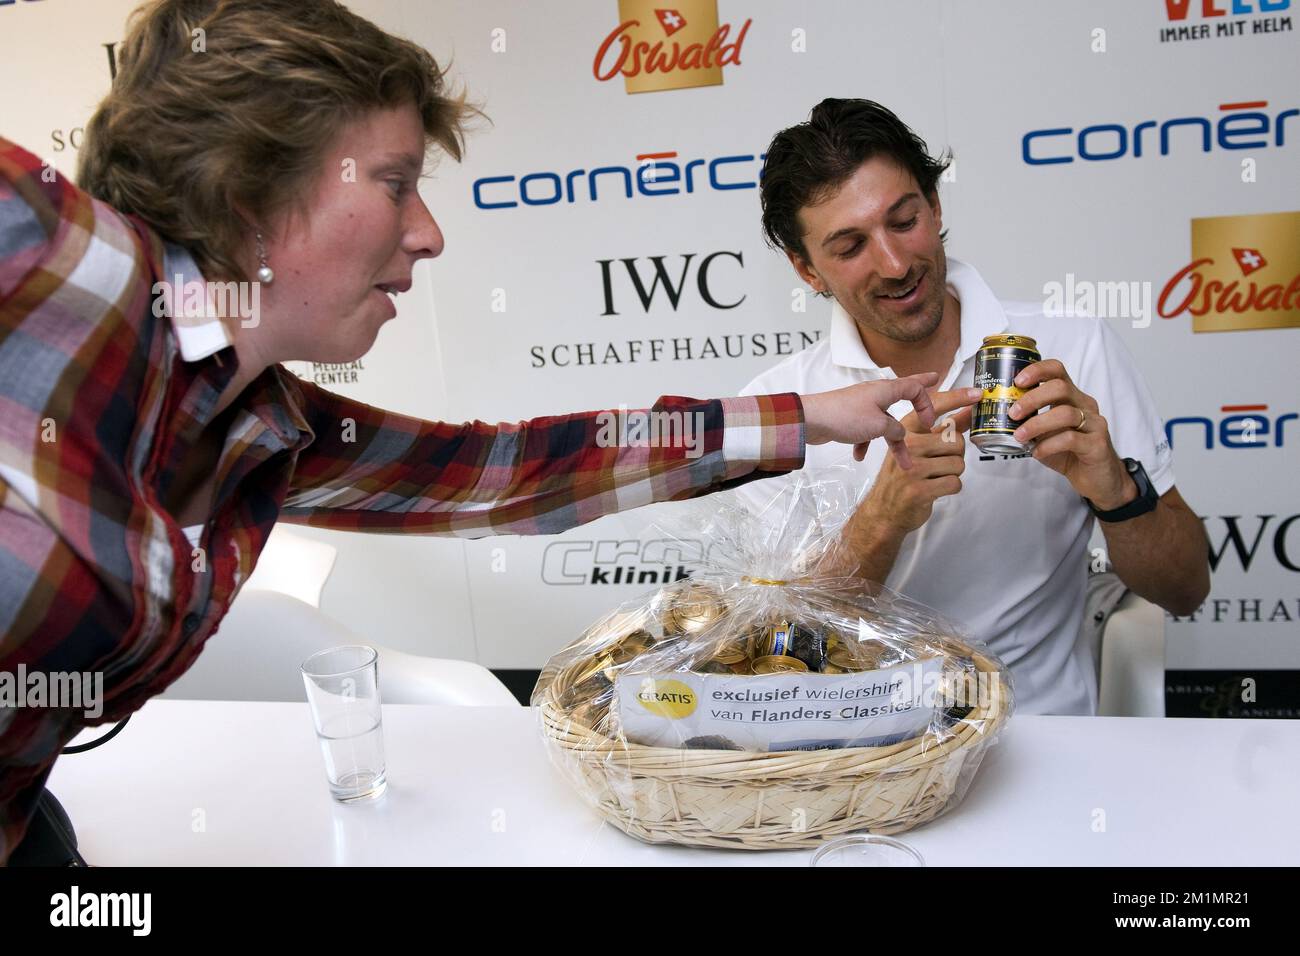 20120403 - BASEL, SWITZERLAND: Journalist Ann Braekman (L) offers a gift to Swiss cycling champion Fabian Cancellara during a press conference update of Swiss Fabian Cancellara of Team Radioshack Nissan Trek cycling team after the crash in which he fractured his right collarbone in four places, during the 96th edition of the 'Ronde van Vlaanderen - Tour des Flandres - Tour of Flanders' one day cycling race, in the Crossklinik, in Basel, Tuesday 03 April 2012. The bone was put together using a special technique allowing a better and faster recovery. Fabian Cancellara also announced that he is t Stock Photo